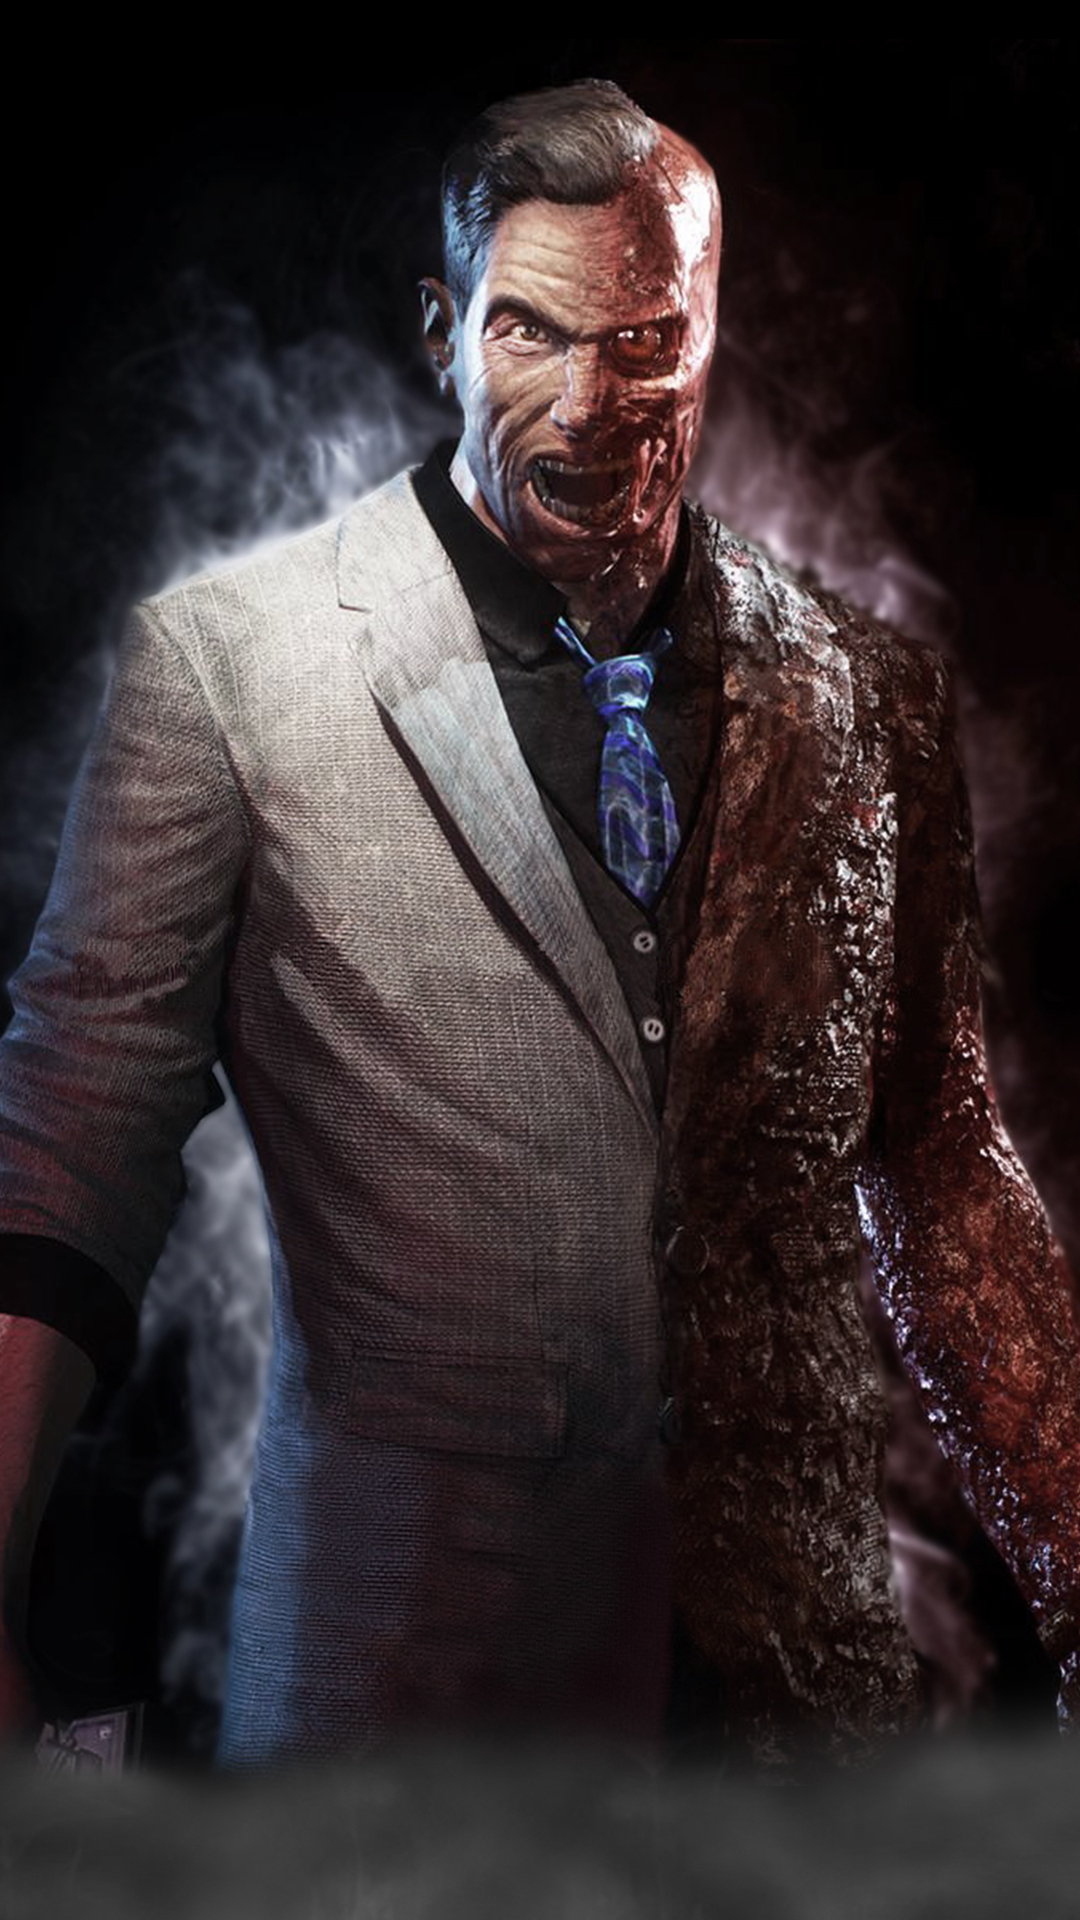 TWO FACE / ARKHAM KNIGHT by JPGraphic on DeviantArt